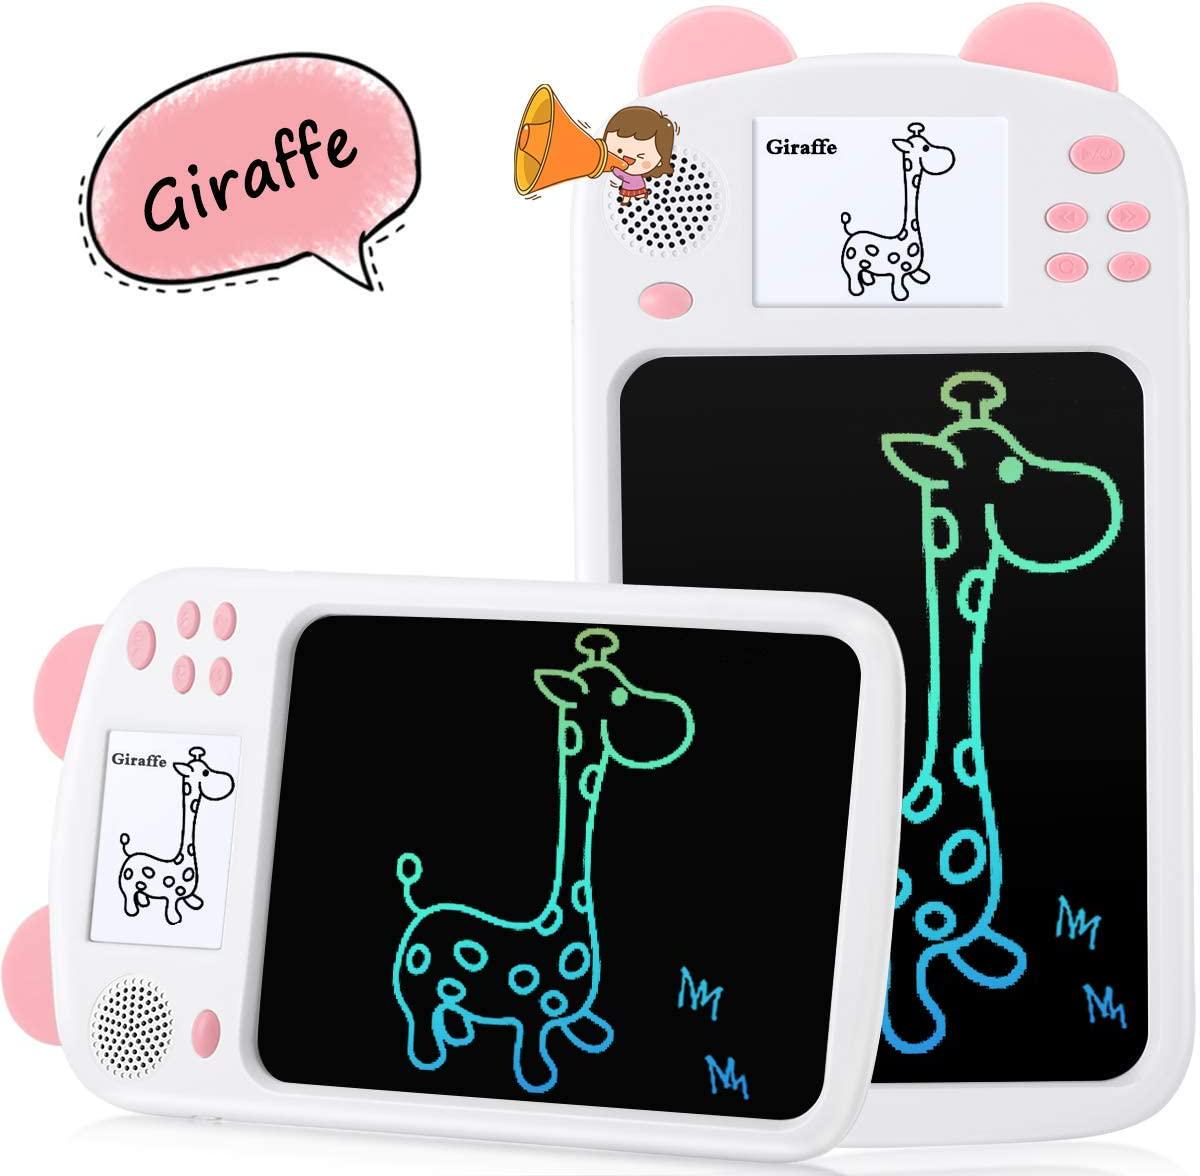 AGPTEK, LCD Doodle Board Writing Tablet, AGPTEK 8.5 Inch Drawing Board with Cartoon Images Support Voice Reading Portable Colorful Screen Kids Toys for 3-6 Year Old Gifts